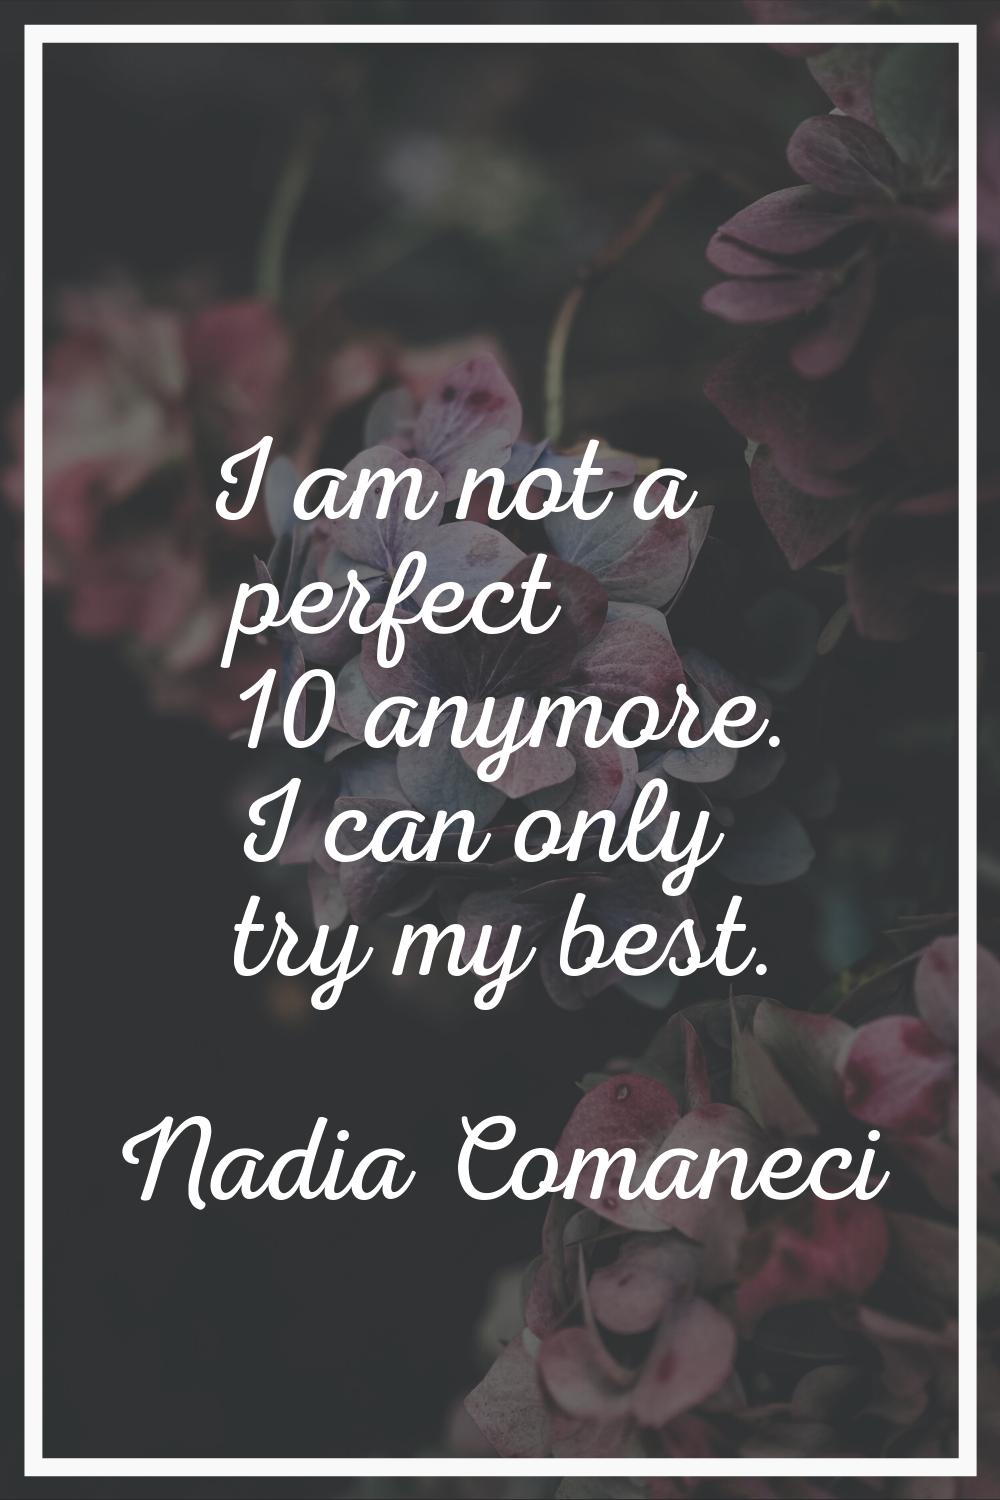 I am not a perfect 10 anymore. I can only try my best.